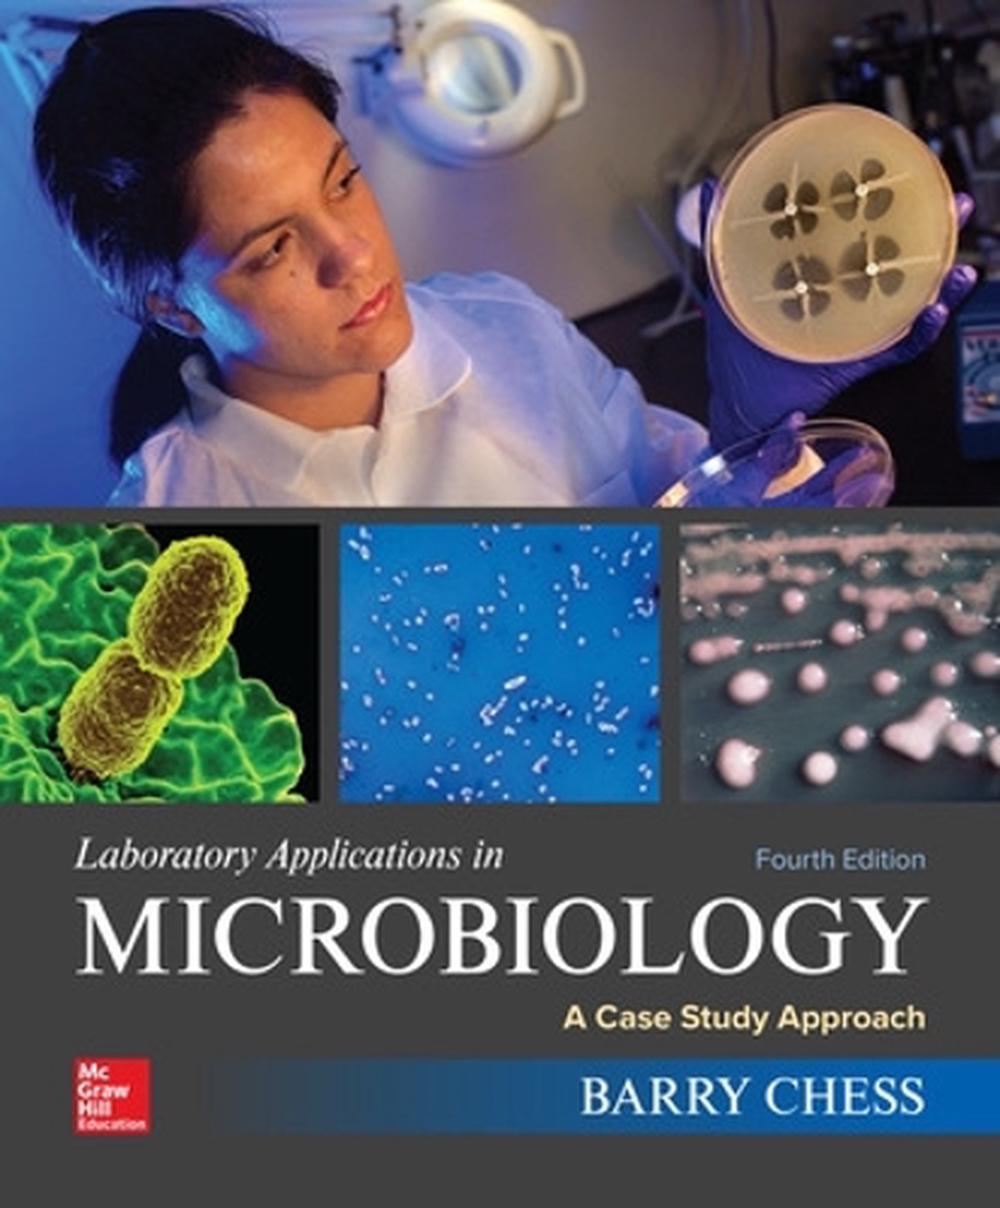 online　Case　The　9781259705229　at　Nile　in　Study　Barry　by　Spiral,　Chess,　Microbiology:　Applications　Approach　Buy　Laboratory　A